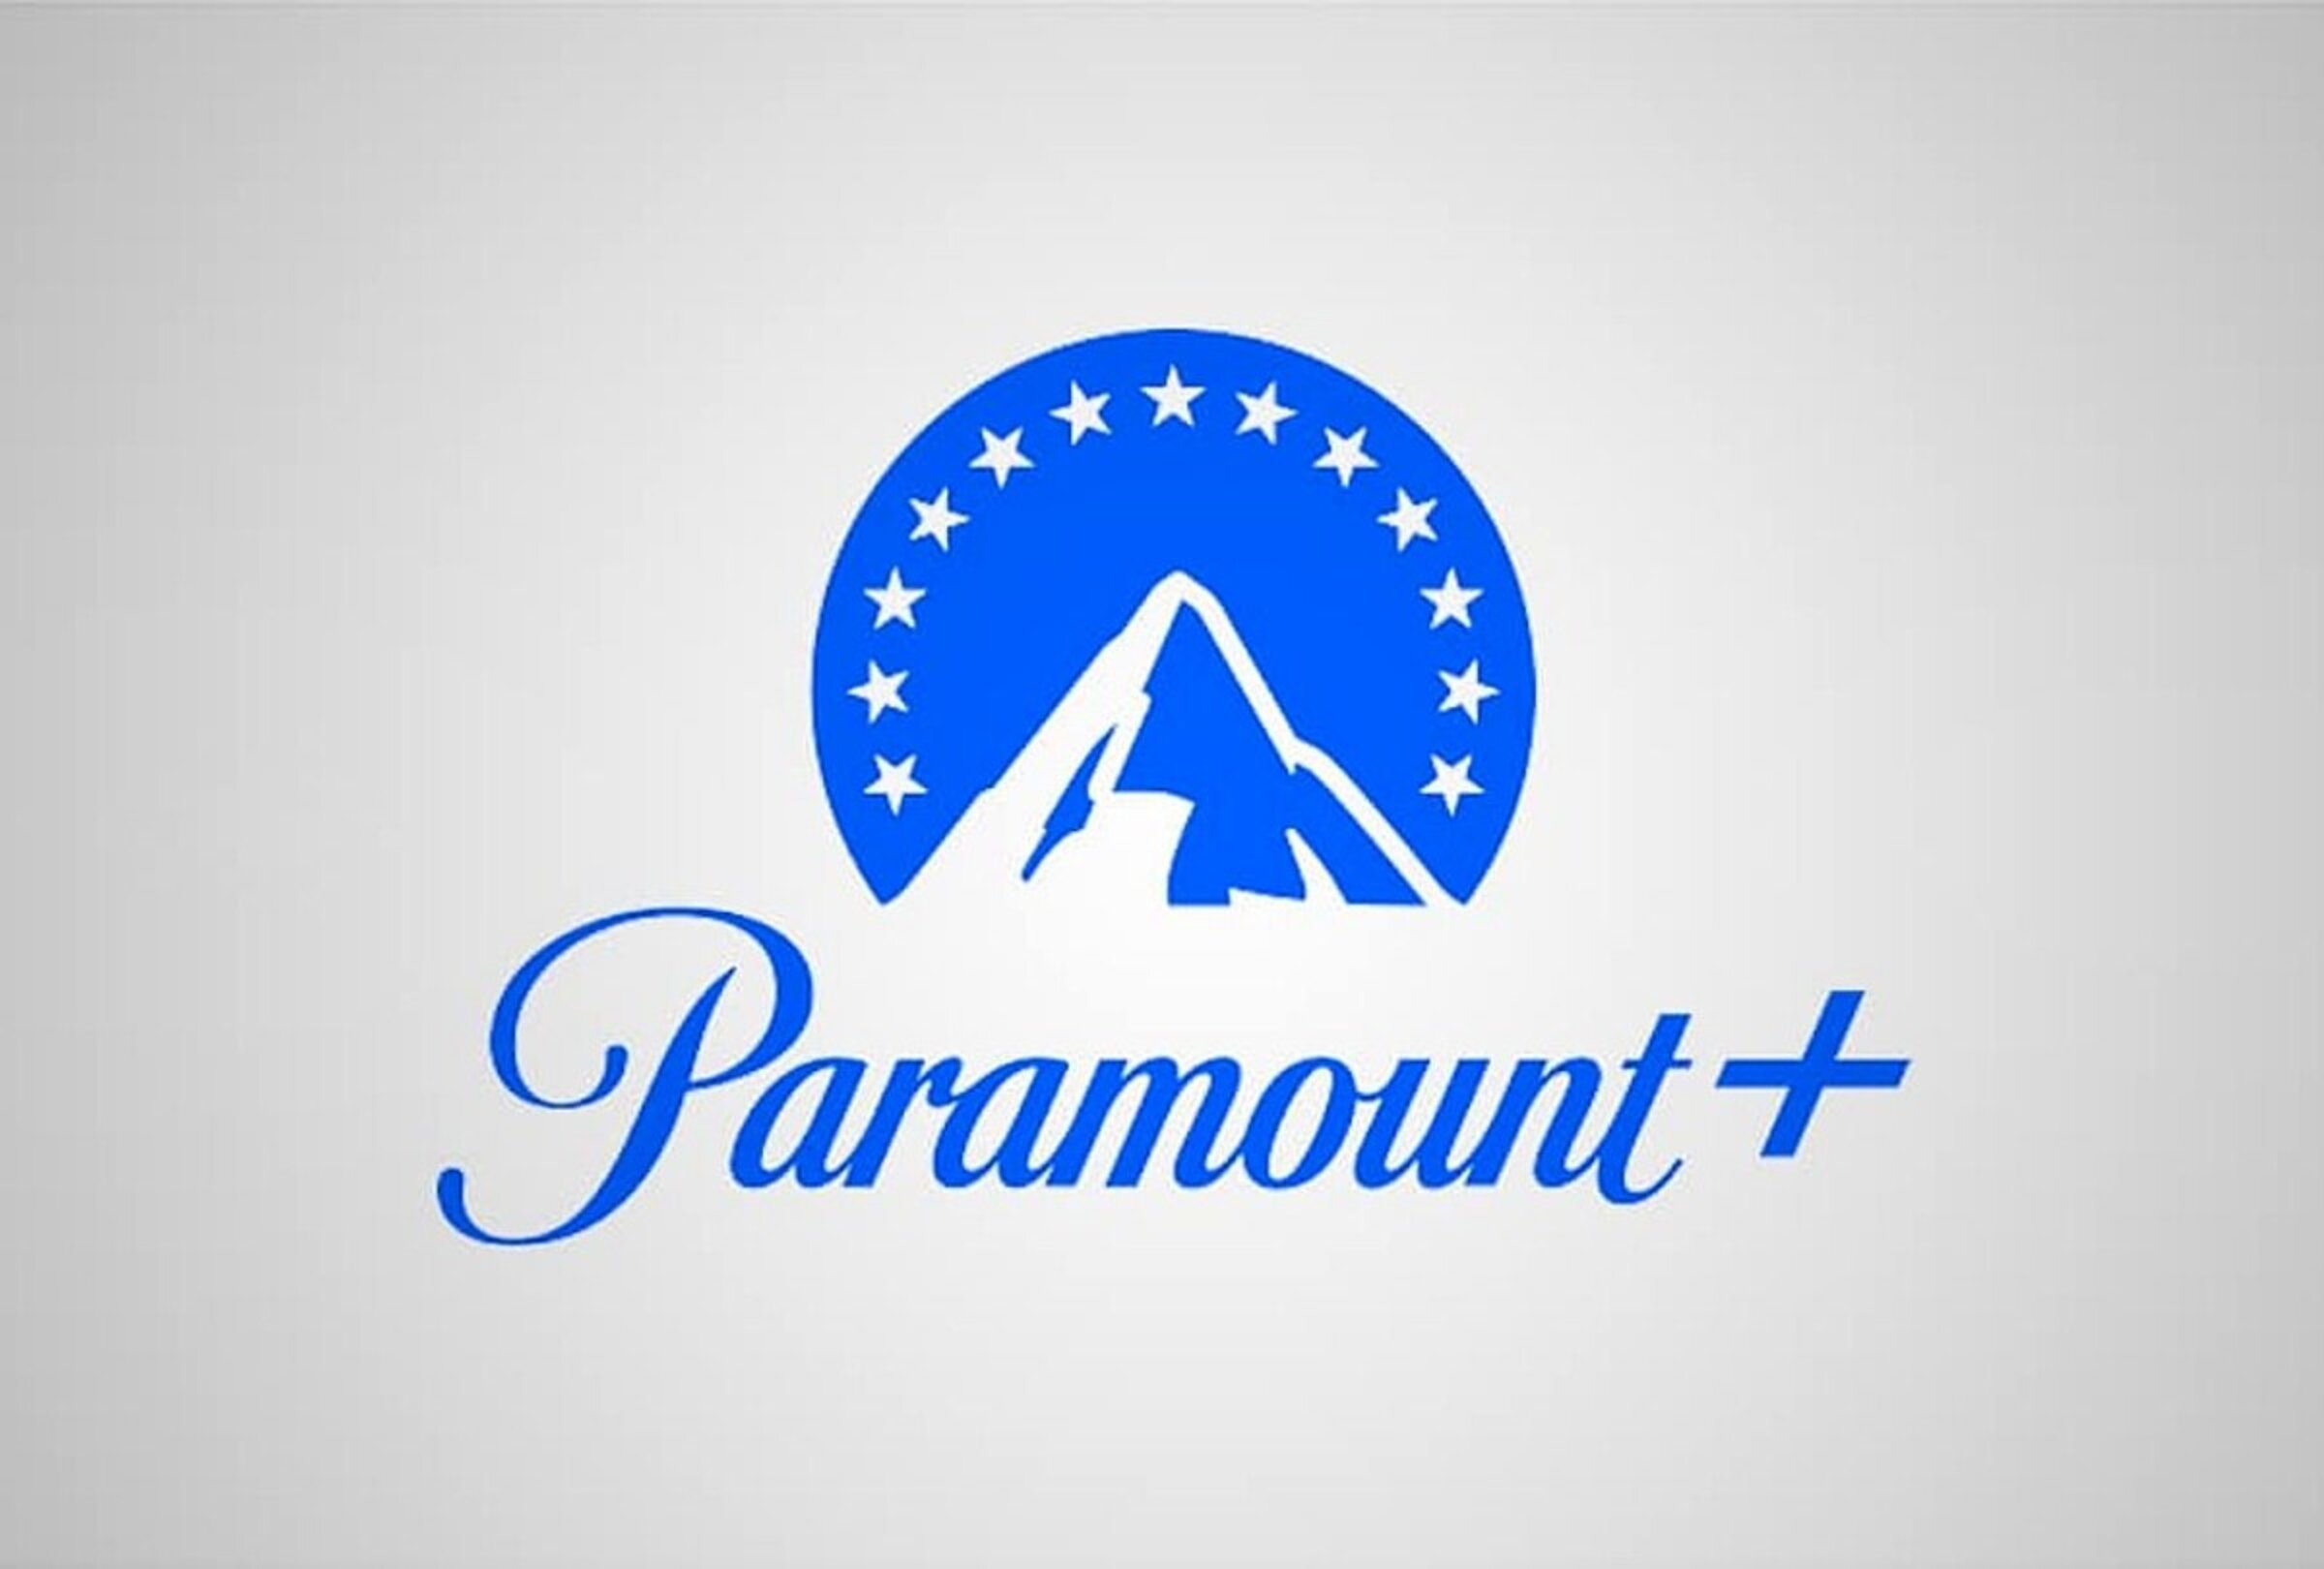 Check out these new and recent movies with your Paramount+ account